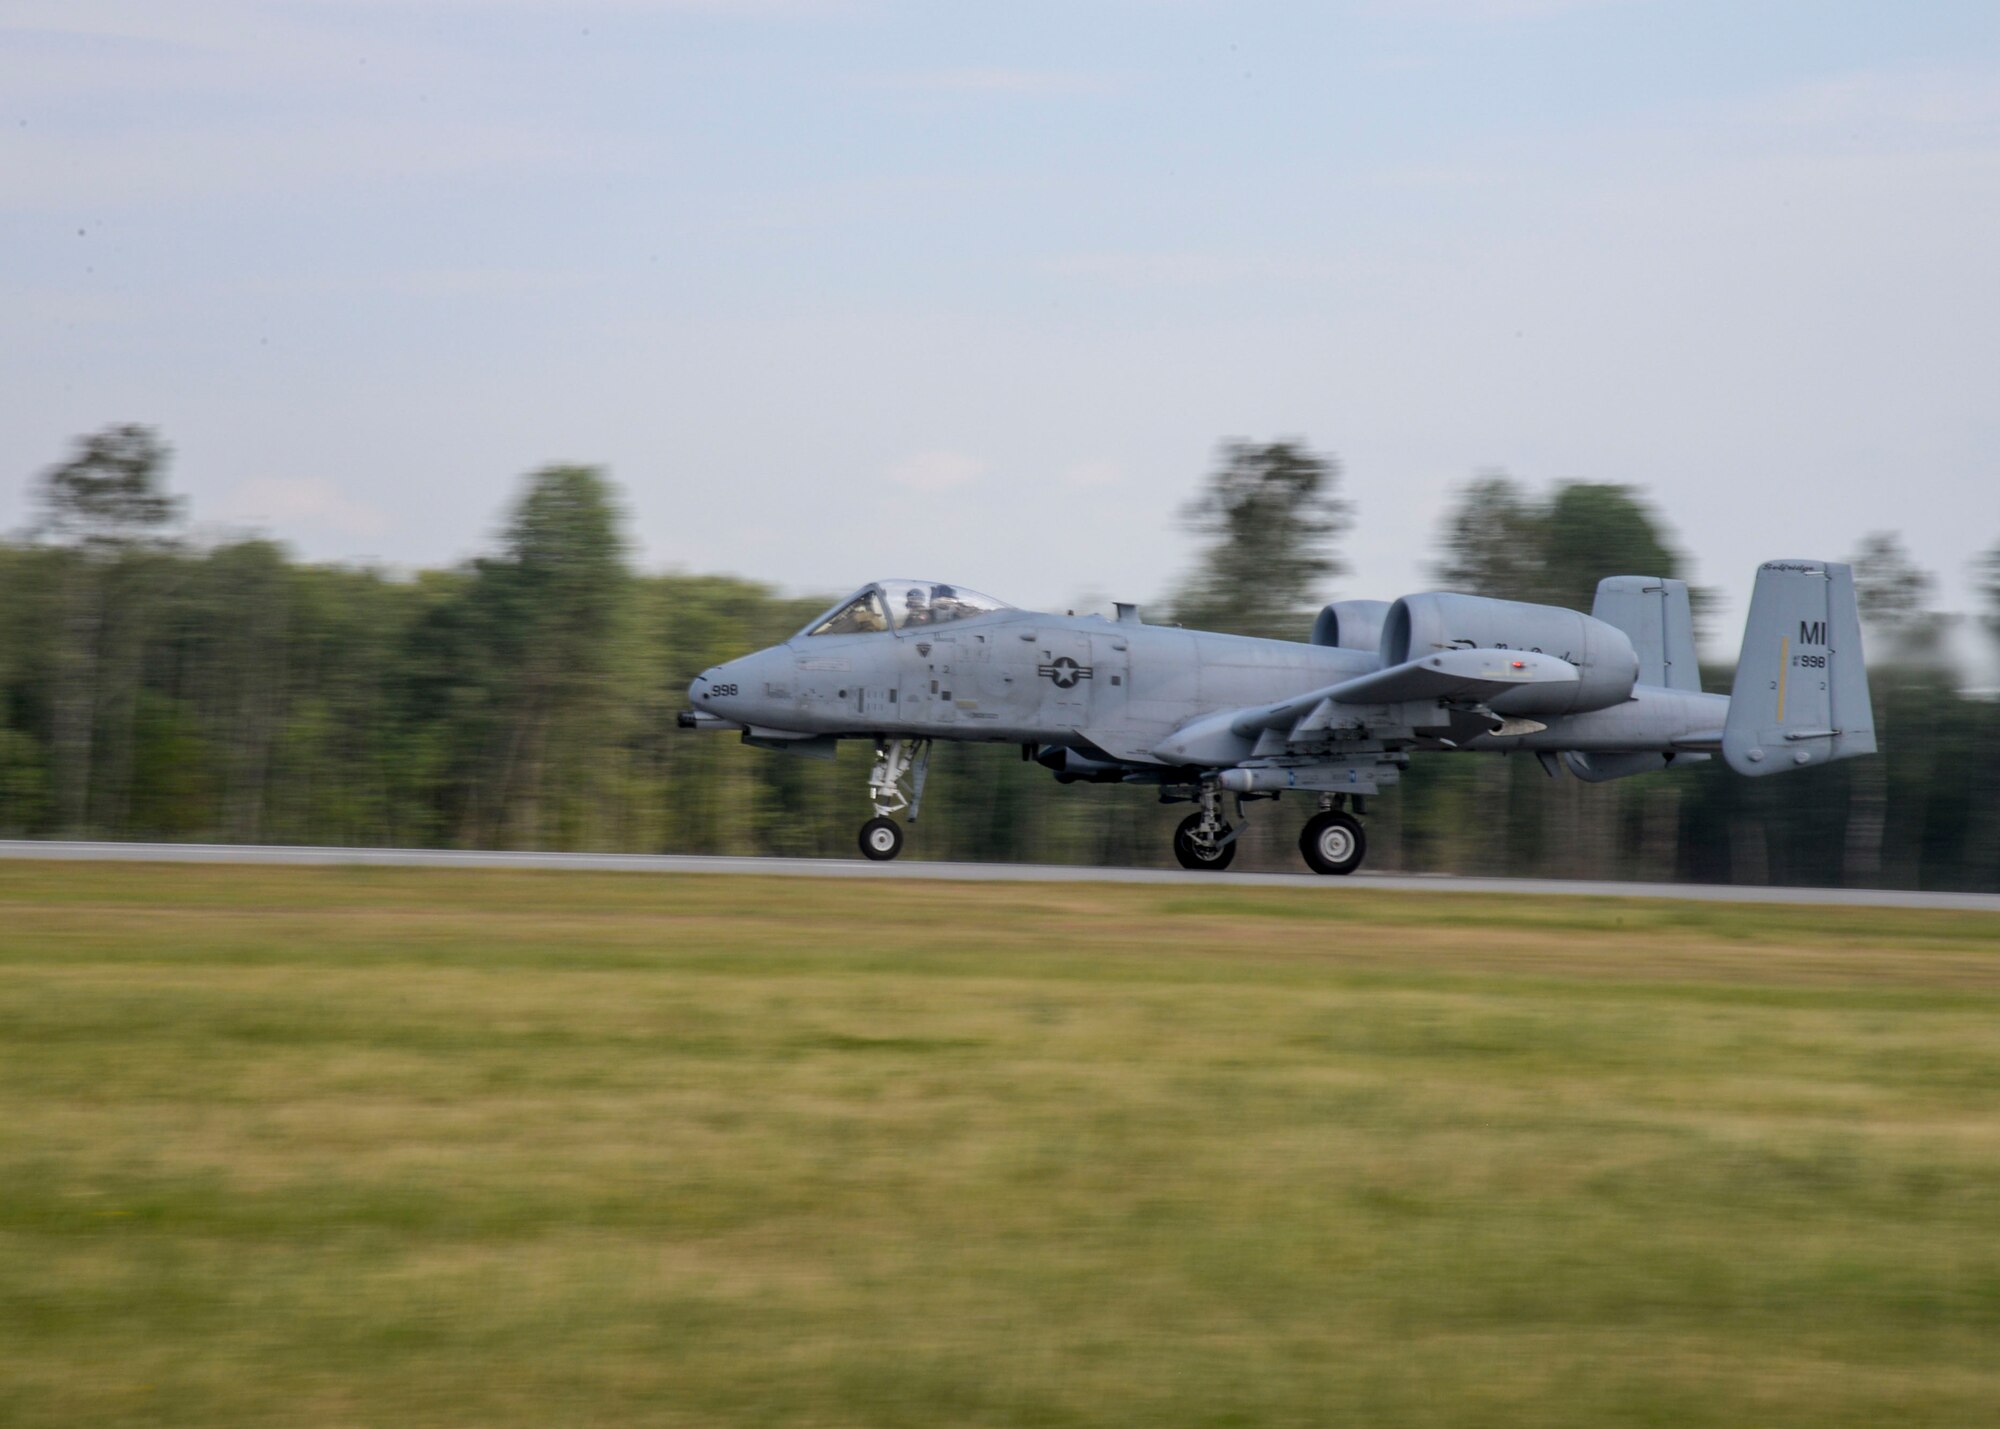 An A-10 Thunderbolt II takes-off from Lielvarde Air Base, Latvia, June 4, 2018.  A-10s were deployed to Europe from the 127th Wing at Selfridge Air National Guard Base, Michigan, to support exercise Saber Strike 18. While flying, A-10 pilots worked on close air support tactics and communication with Joint Terminal Attack Controllers to combine air and land capabilities for U.S. and partnered nations. (U.S. Air Force photo by Staff Sgt. Jimmie D. Pike)